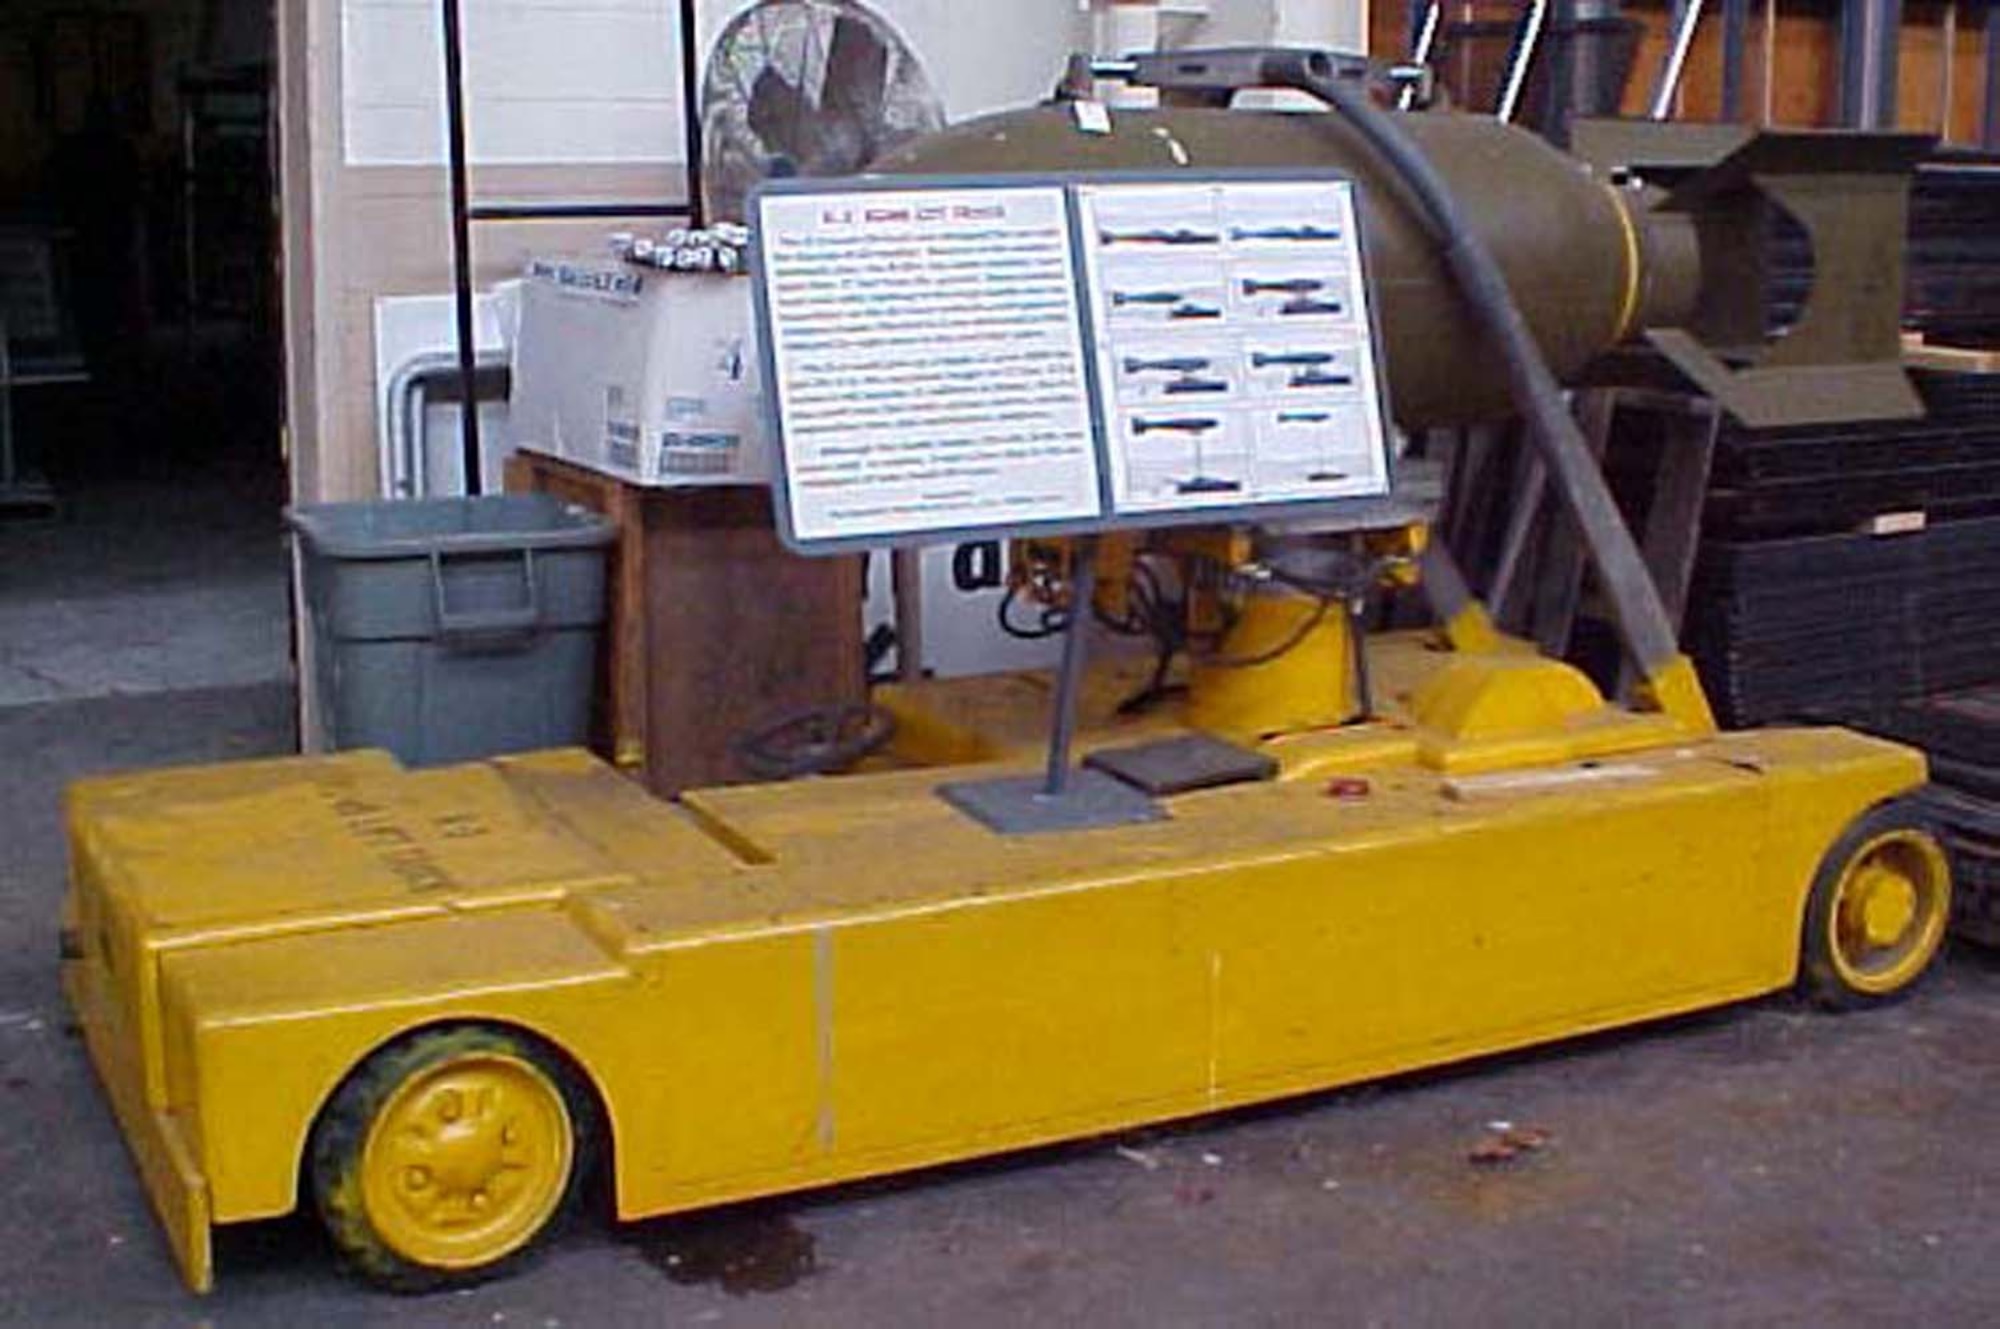 The K-3 bomb lift truck was designed for use with the Convair B-36 bomber. Because of the bomber's mammoth size, the B-36's top bomb shackles were more than 17 feet from the ground. Hand-cranked hoist and cable loading of the large bombs was too hazardous, so the Air Force ordered a self-powered weapons loader. (U.S. Air Force photo)